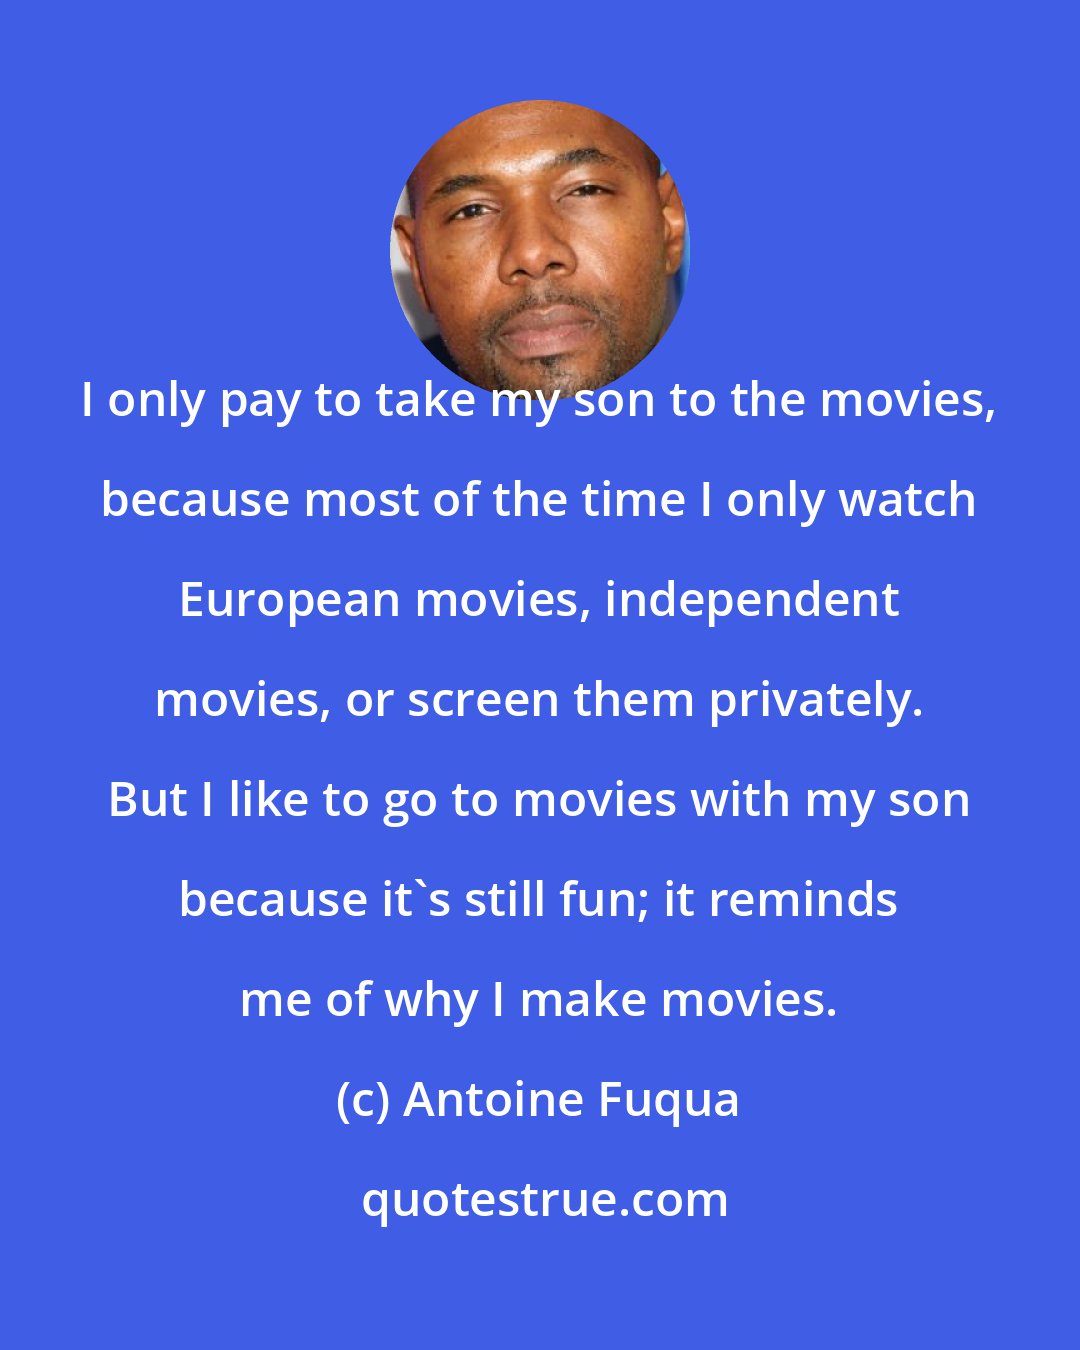 Antoine Fuqua: I only pay to take my son to the movies, because most of the time I only watch European movies, independent movies, or screen them privately. But I like to go to movies with my son because it's still fun; it reminds me of why I make movies.